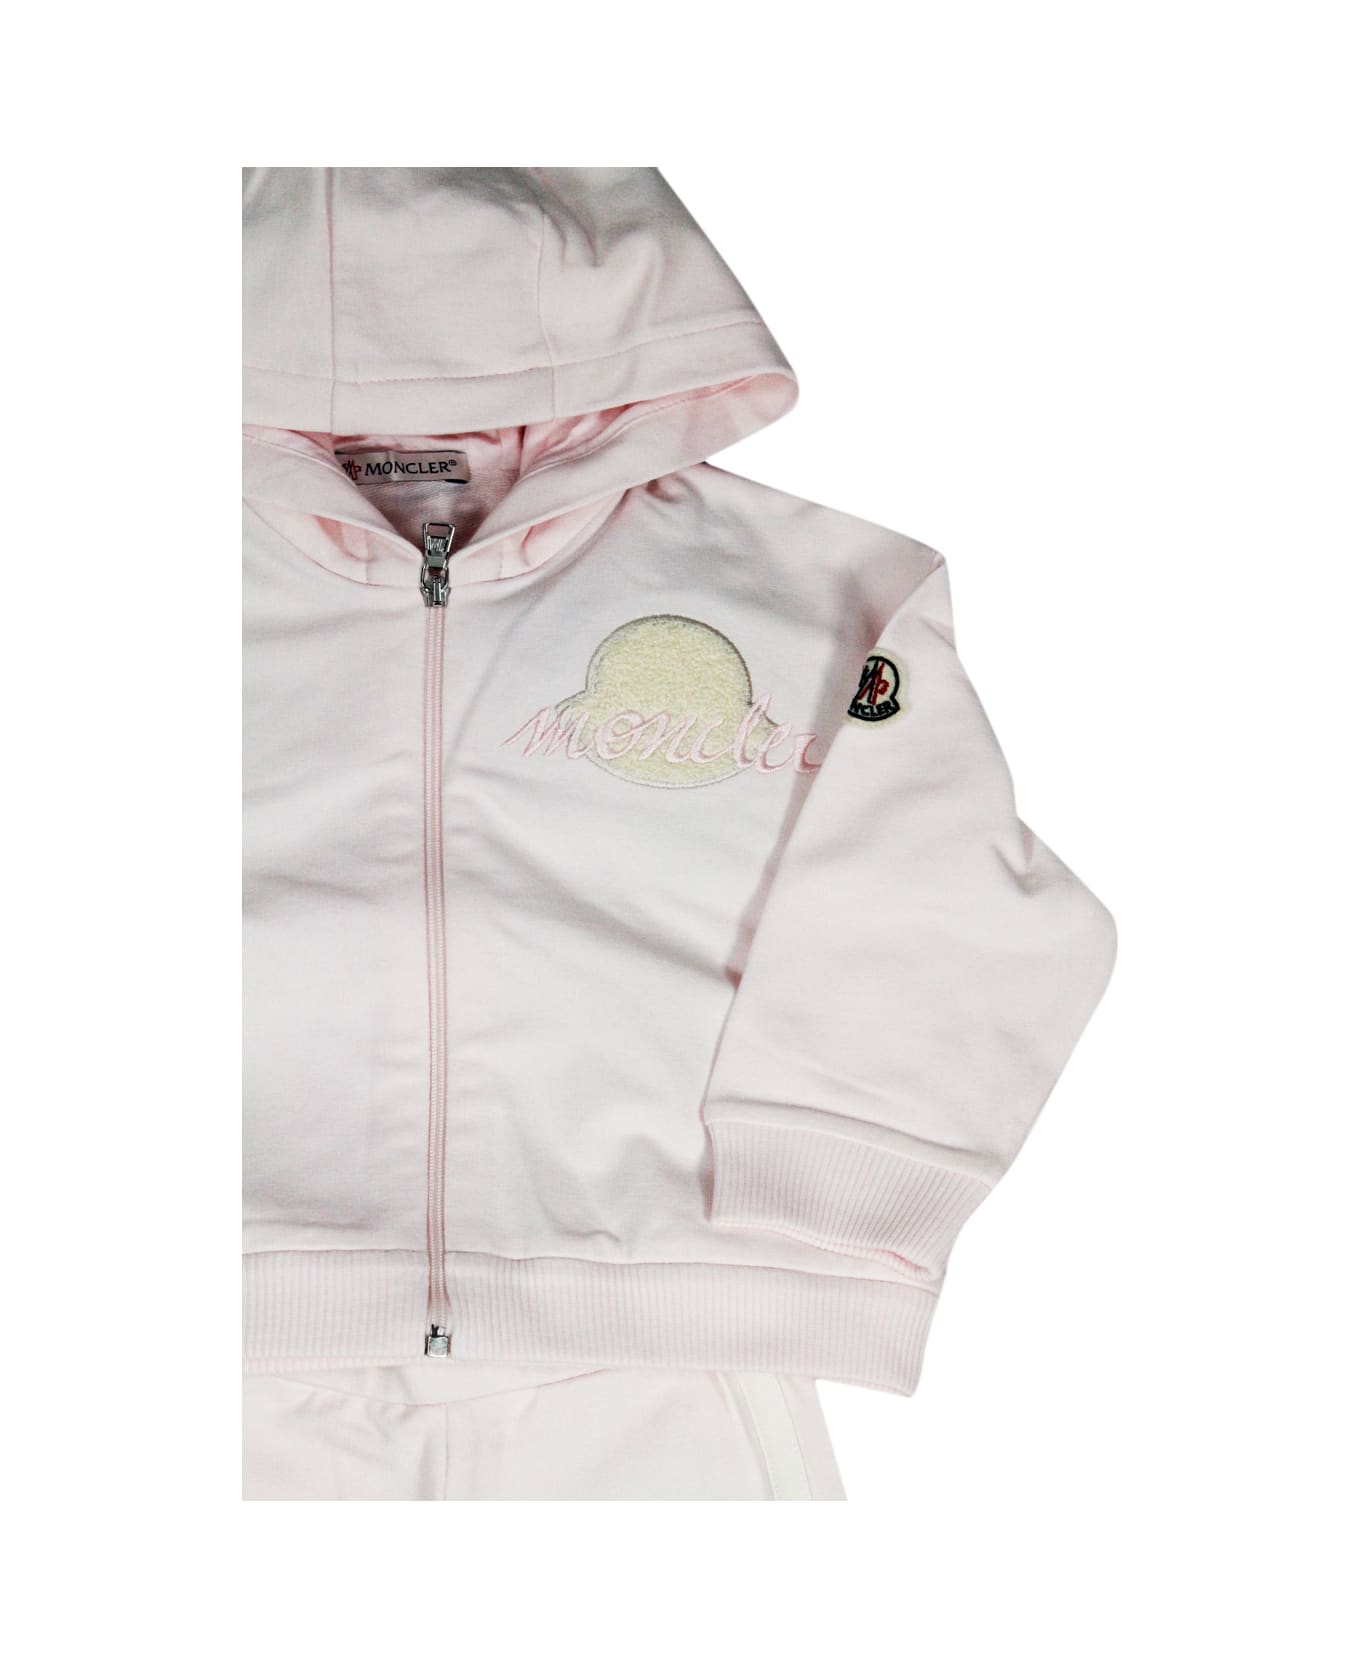 Moncler Complete With Zip-up Sweatshirt With Long-sleeved Hood In Fine Cotton And Trousers With Elastic Waist. Logo On The Chest - Pink